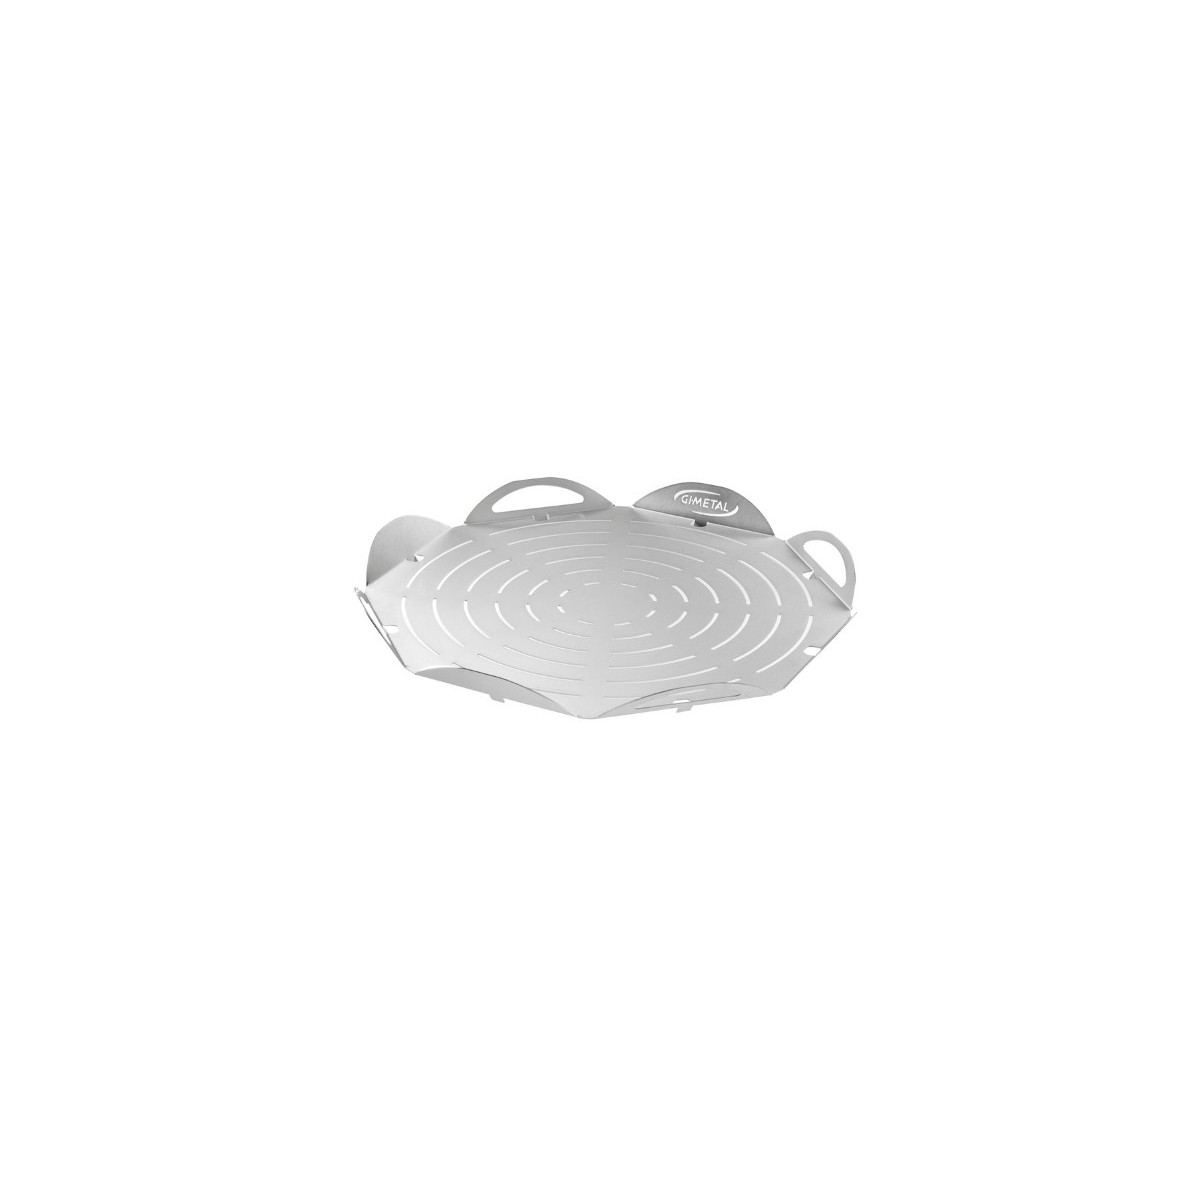 GI-METAL ROUND DRILLED TRAY Ø 41CM WITH FEET